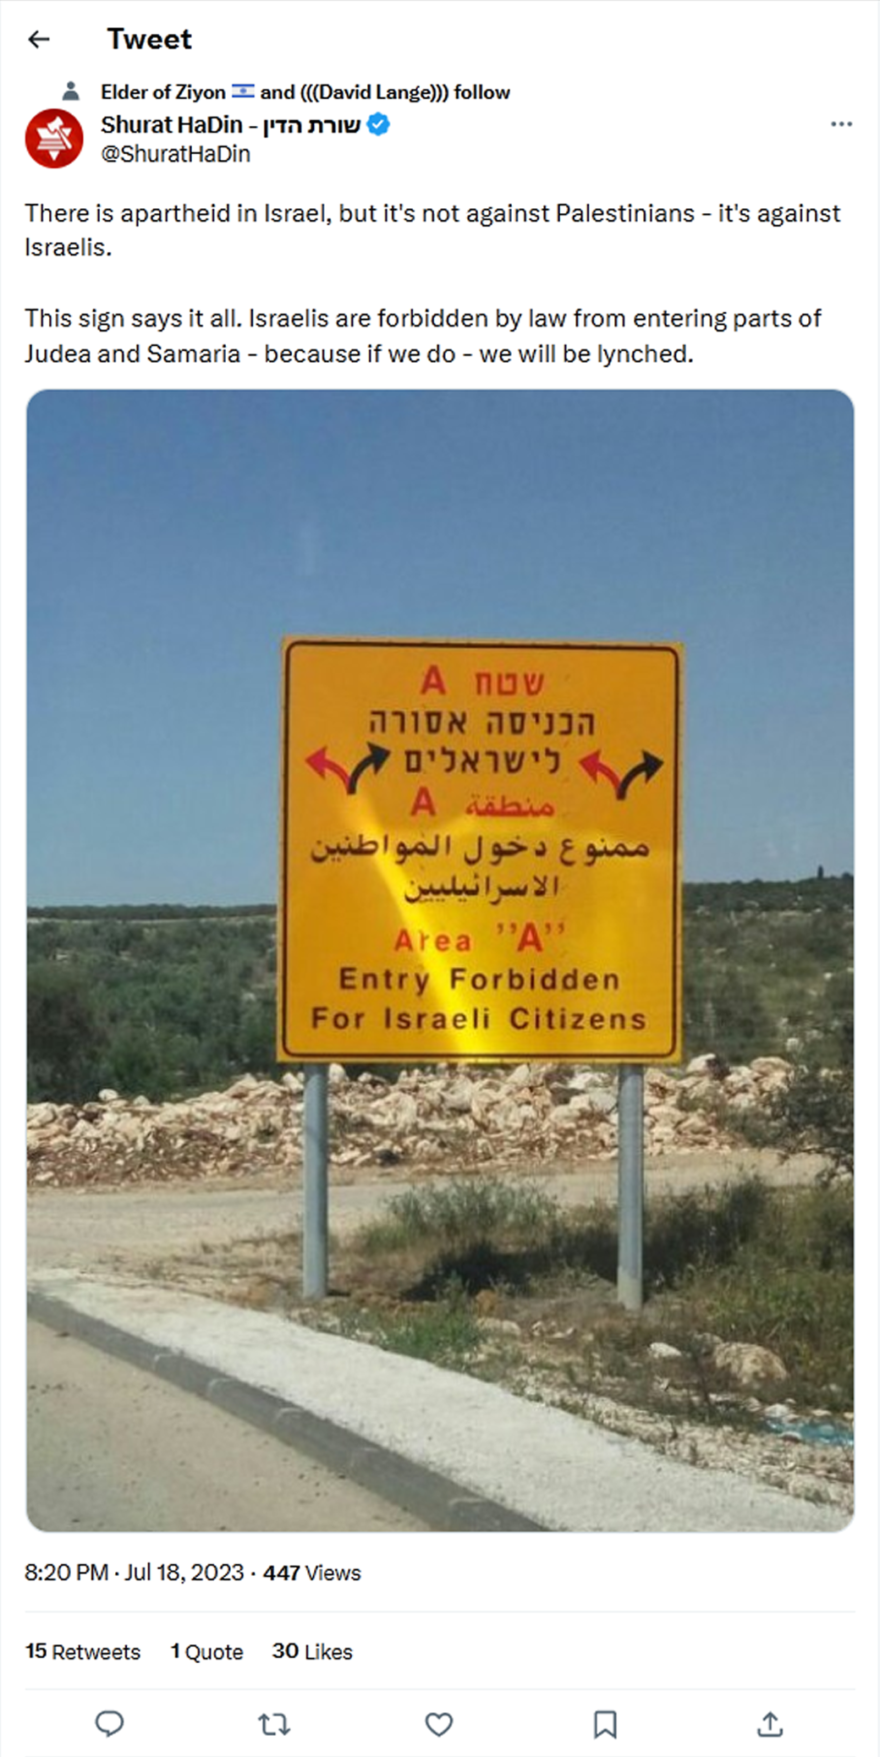 Shurat HaDin-tweet-18July2023-Israelis are forbidden by law from entering parts of Judea and Samaria